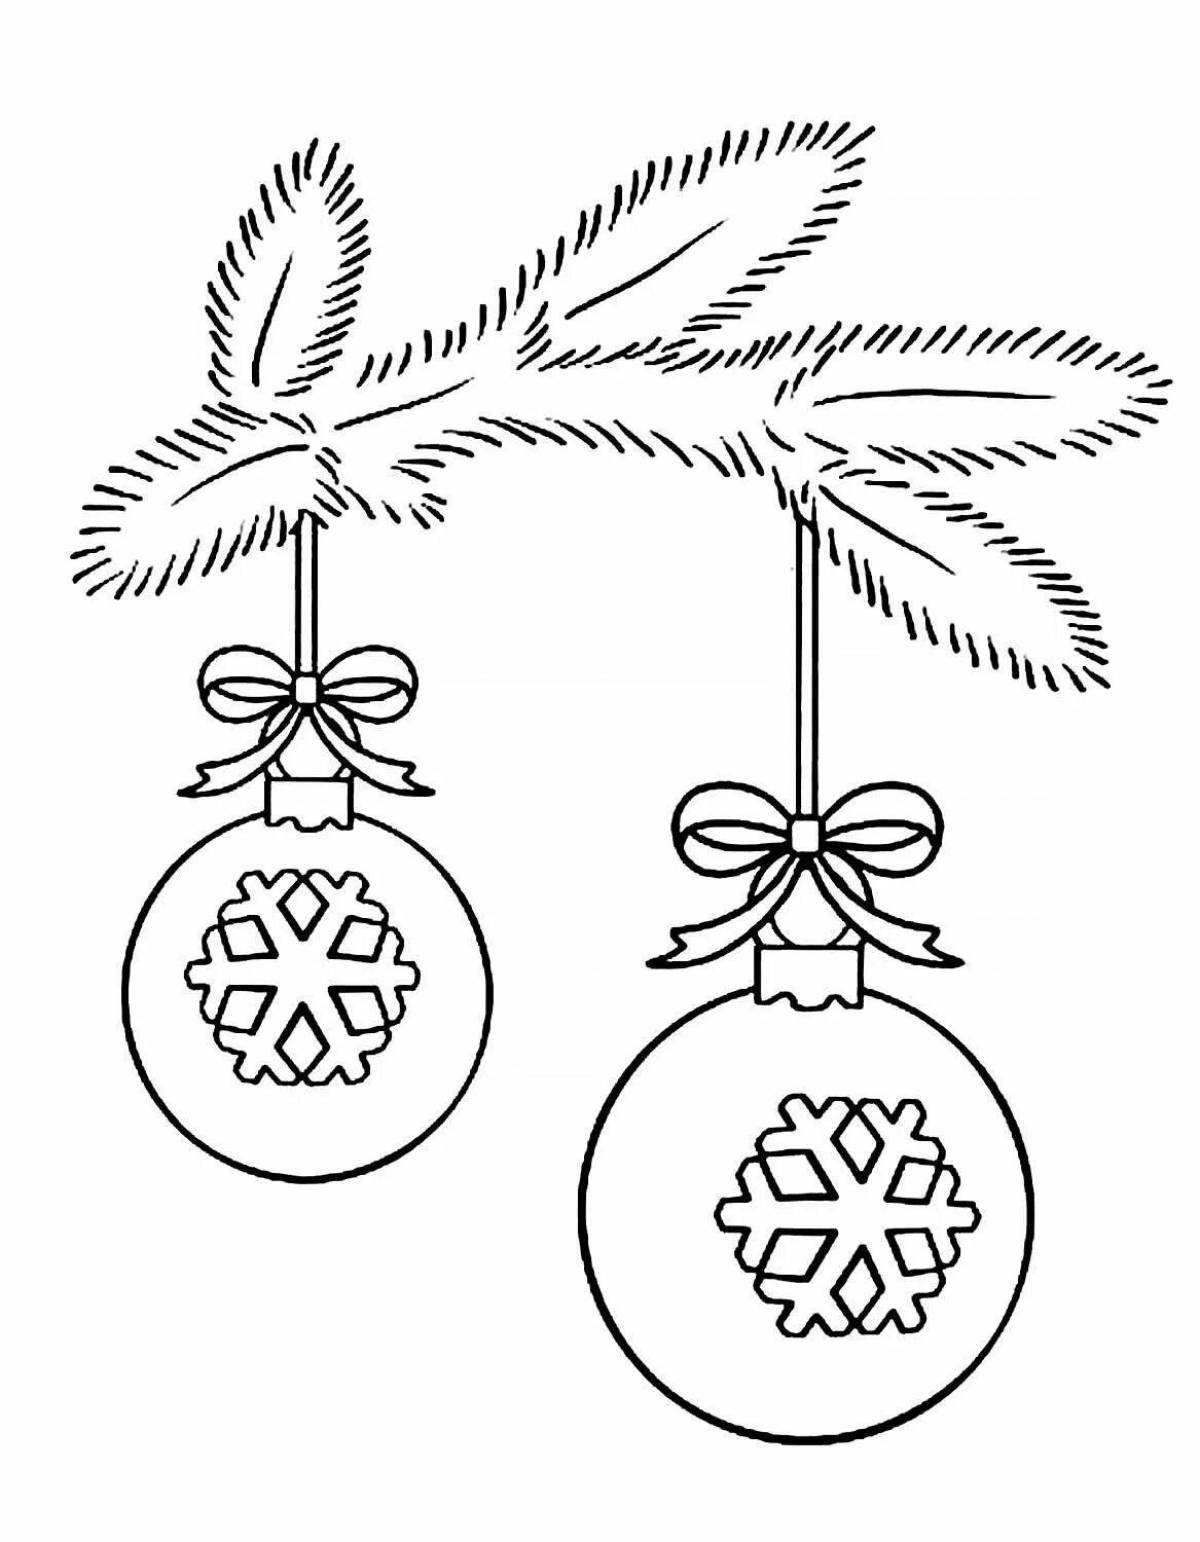 Colorful Christmas tree branch coloring book